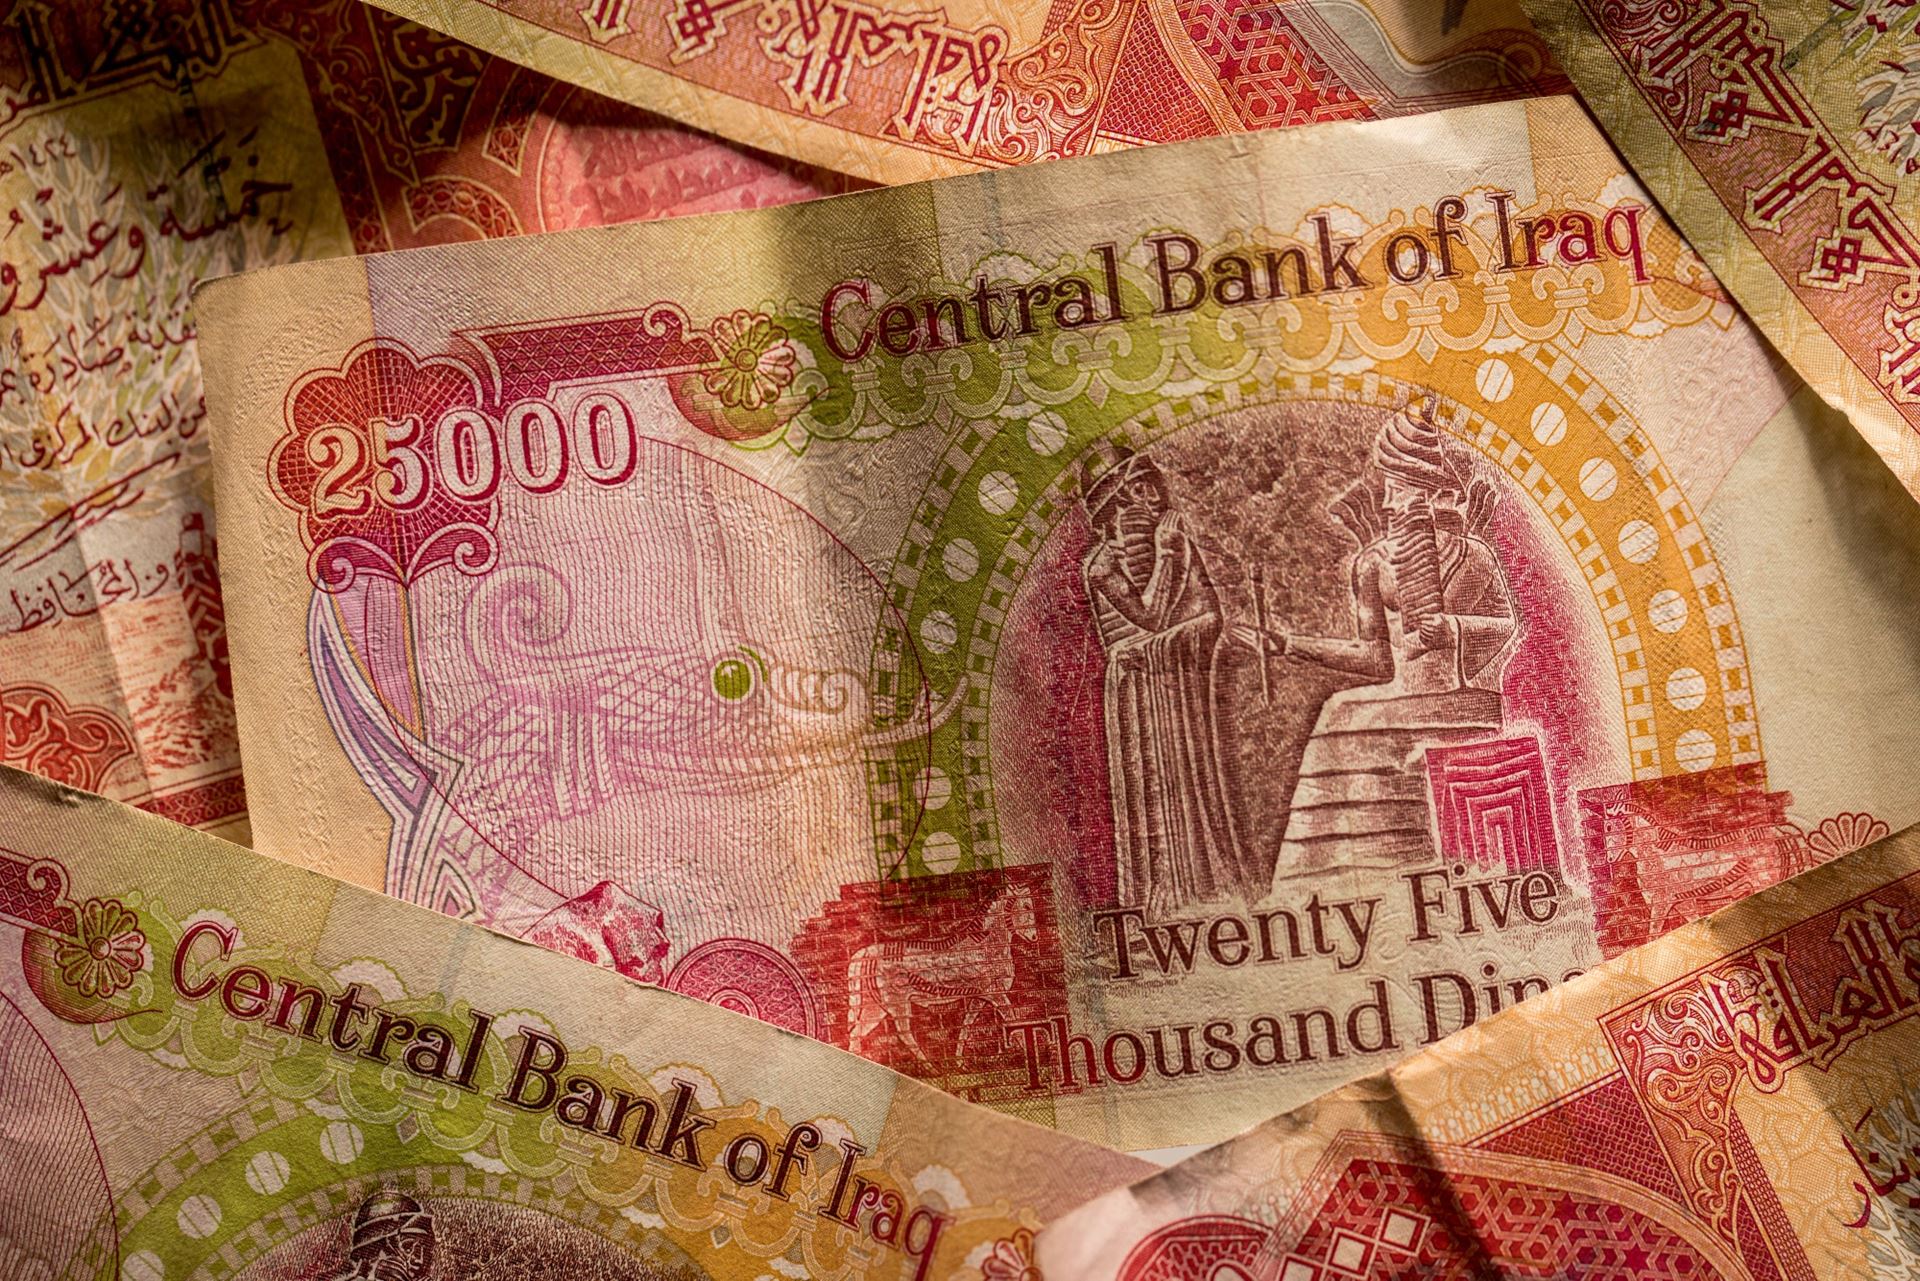 Iraq's new currency regulations: Implications for trade with Iran and domestic currency market